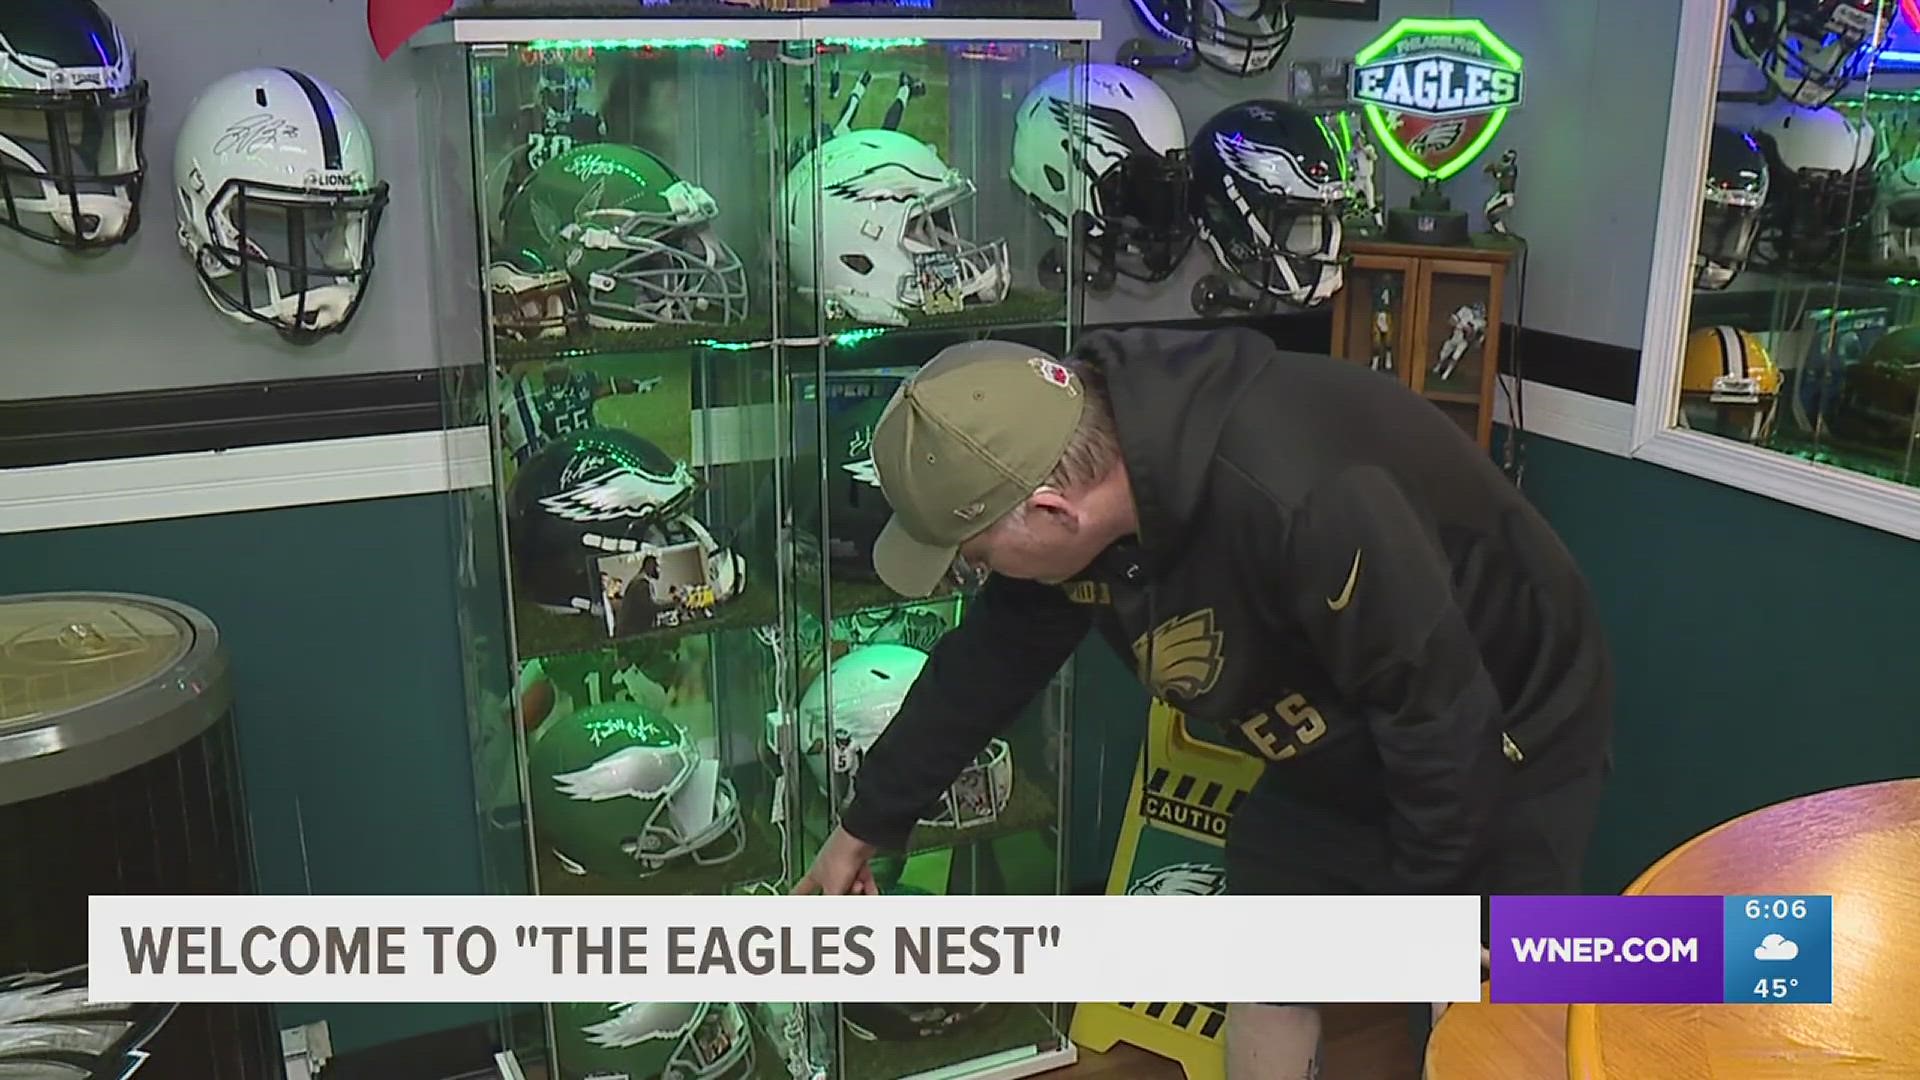 Filled with Eagles memorabilia, a fans' basement has been nicknamed the Eagles nest and it's where they watch every game.